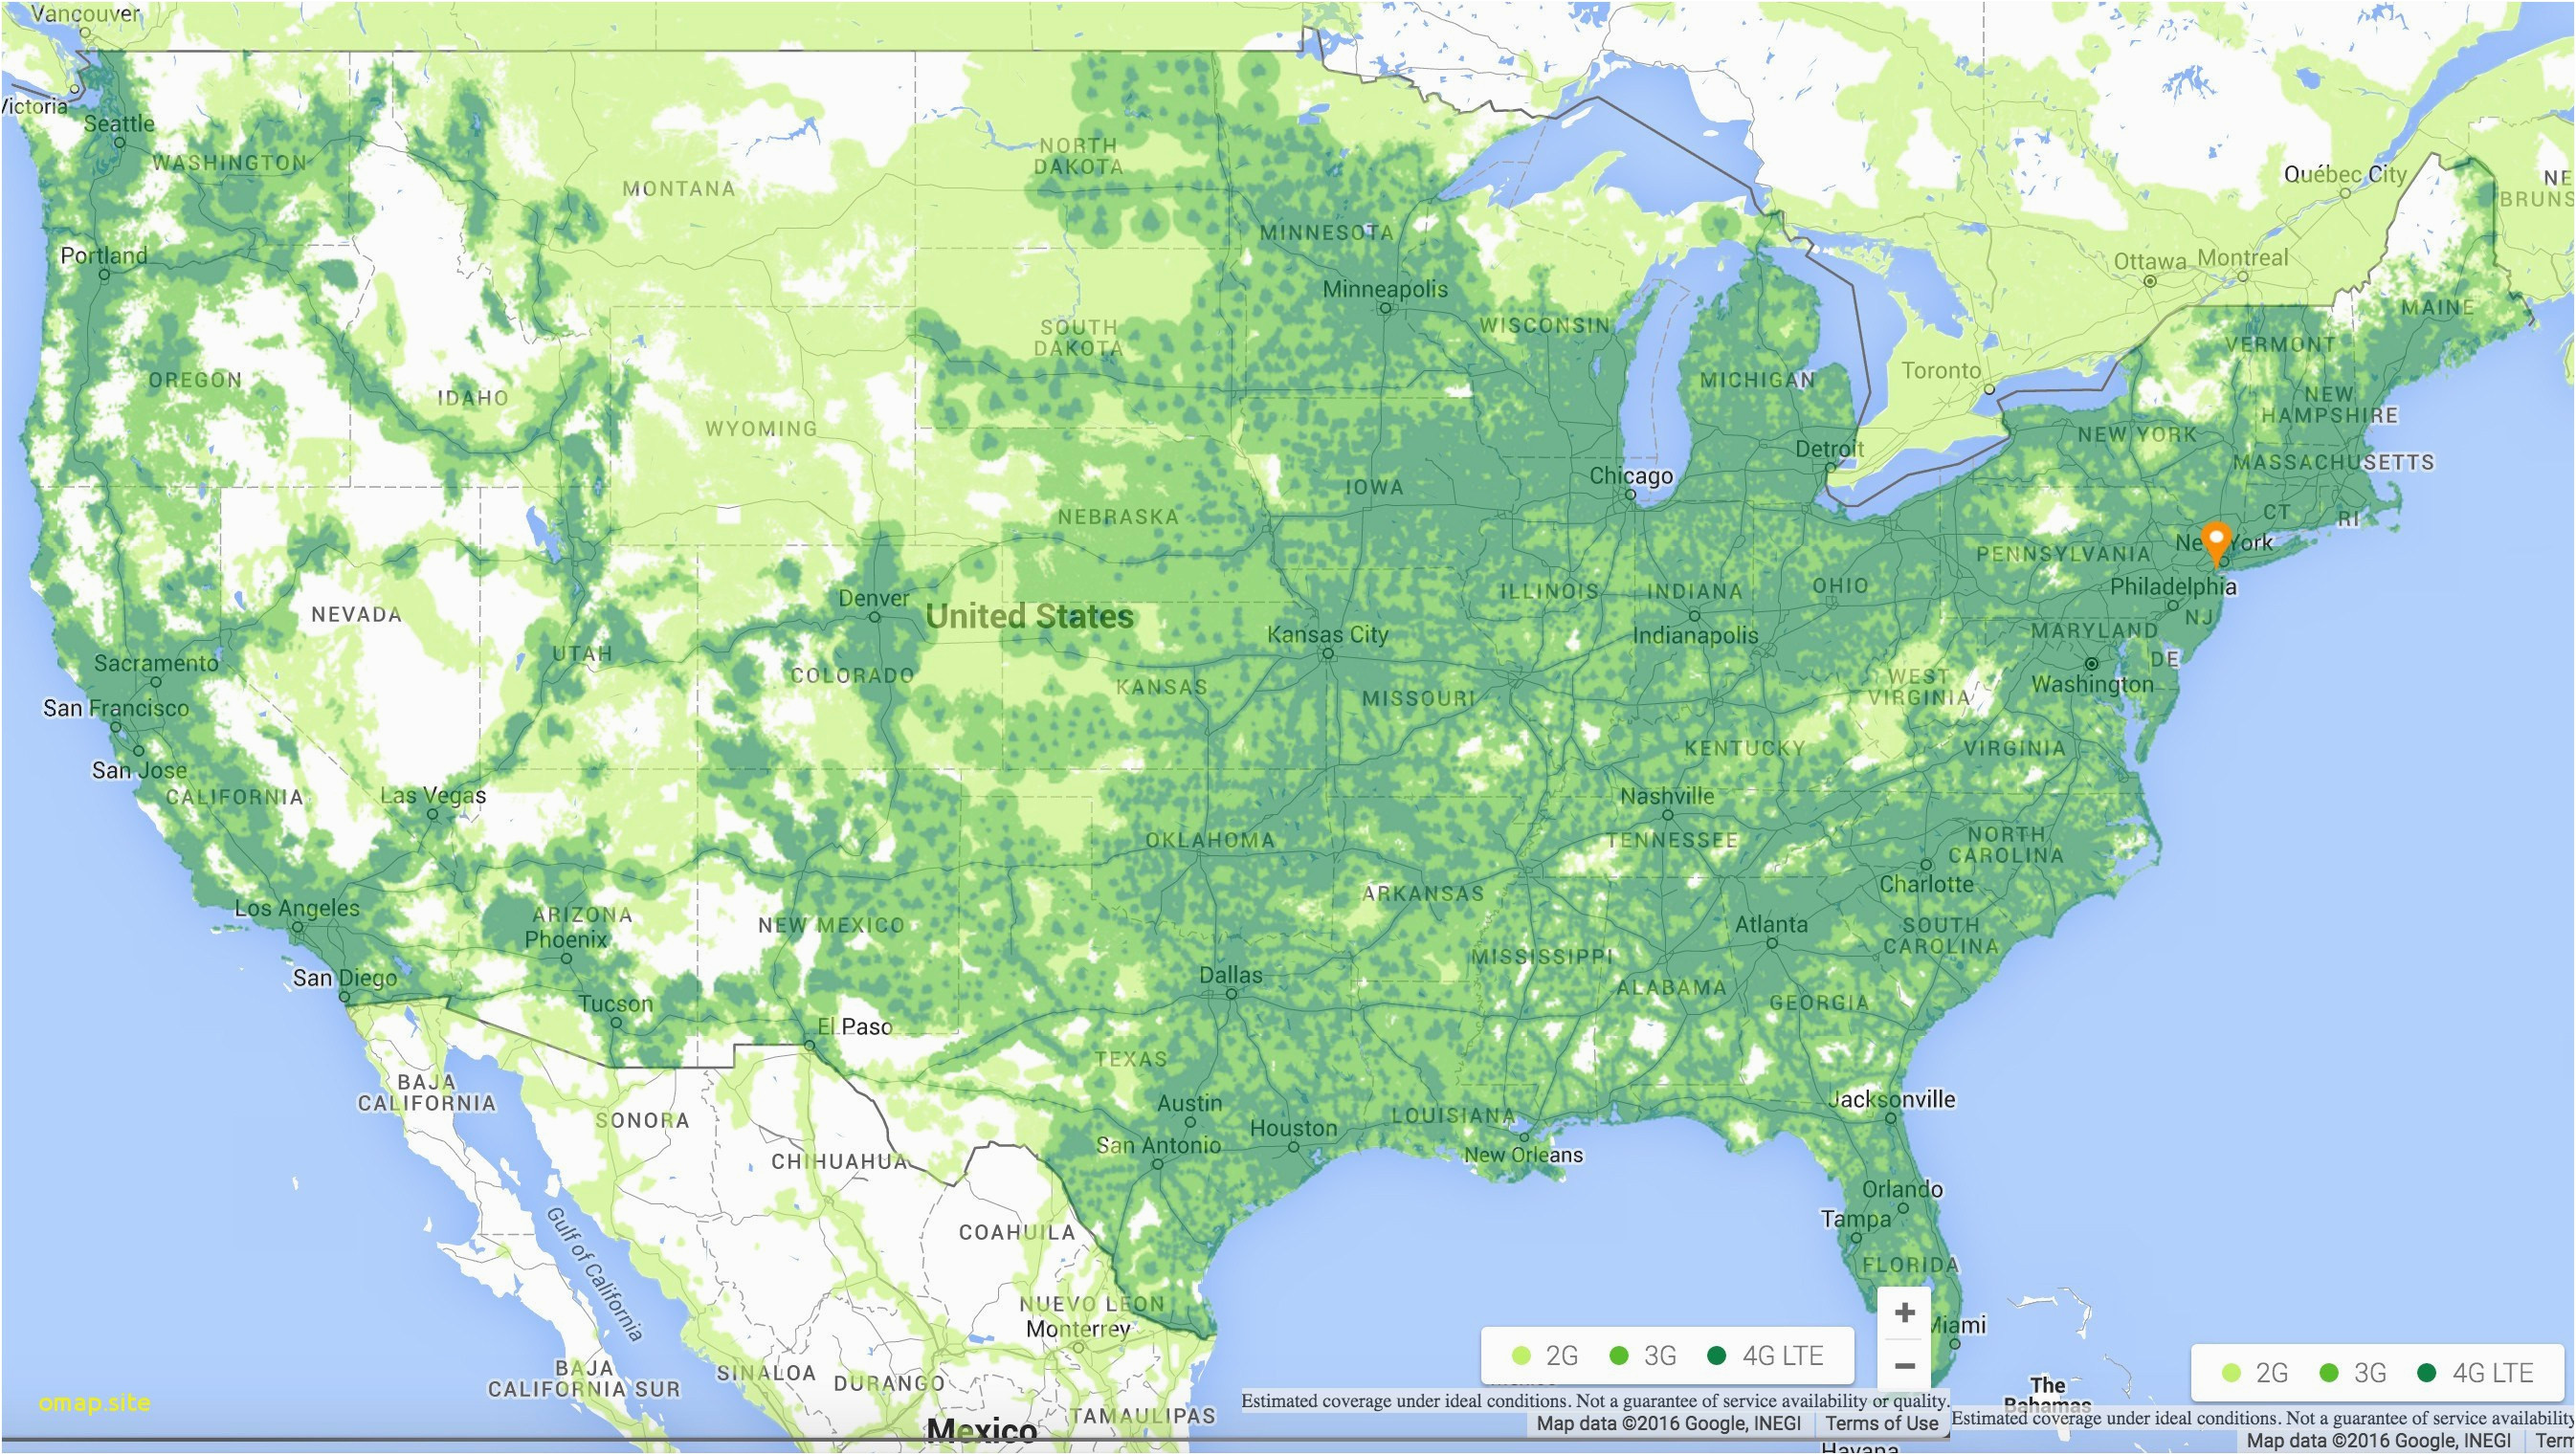 verizon cell phone coverage map fresh us data coverage map new t